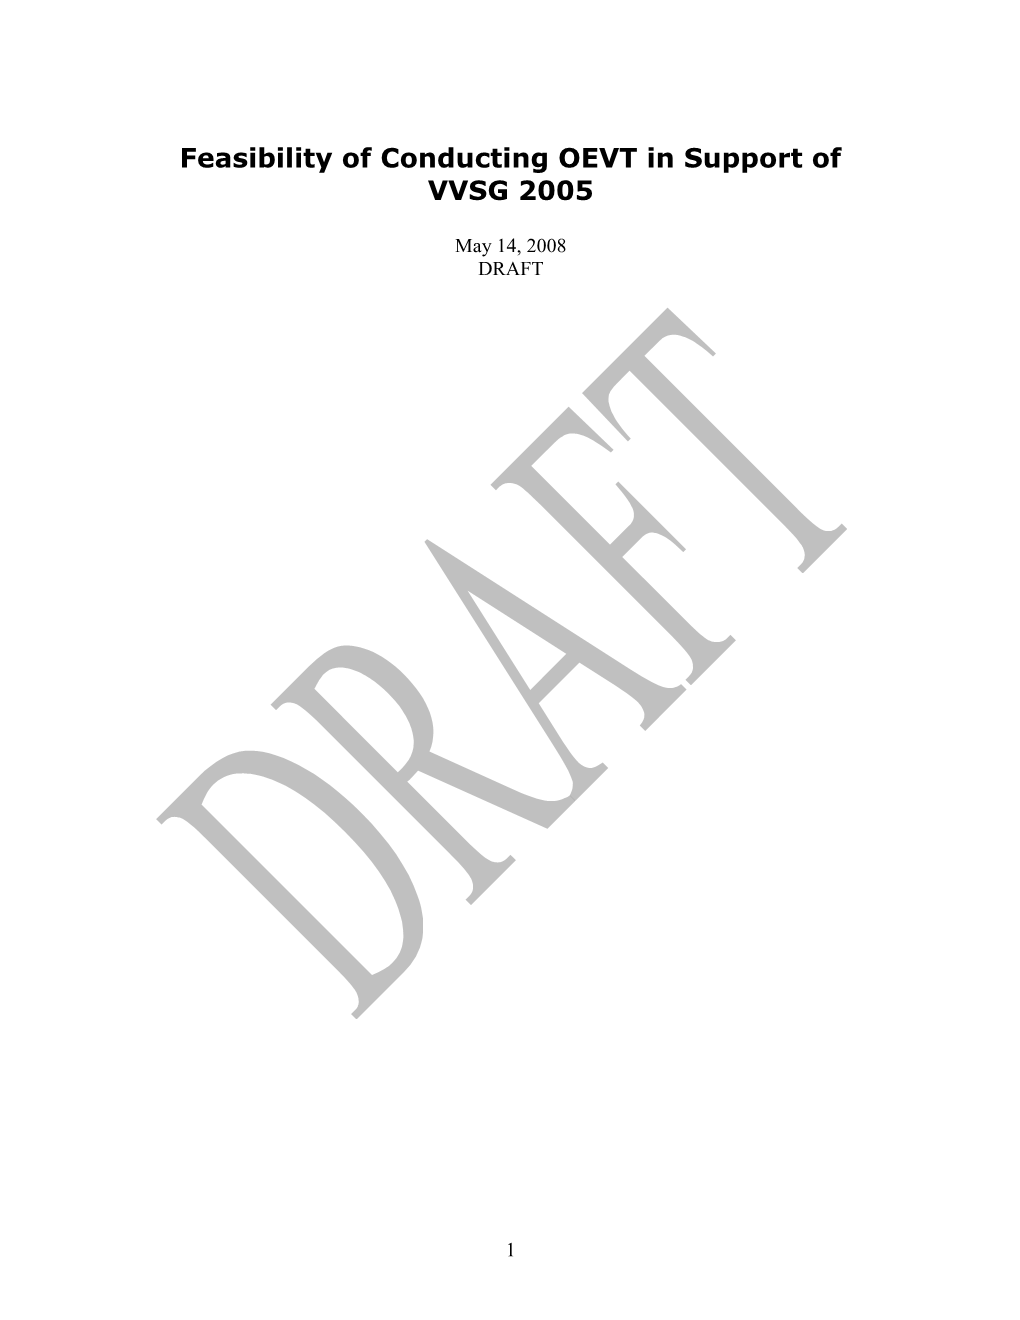 Feasibility of Conducting OEVT in Support of VVSG 2005